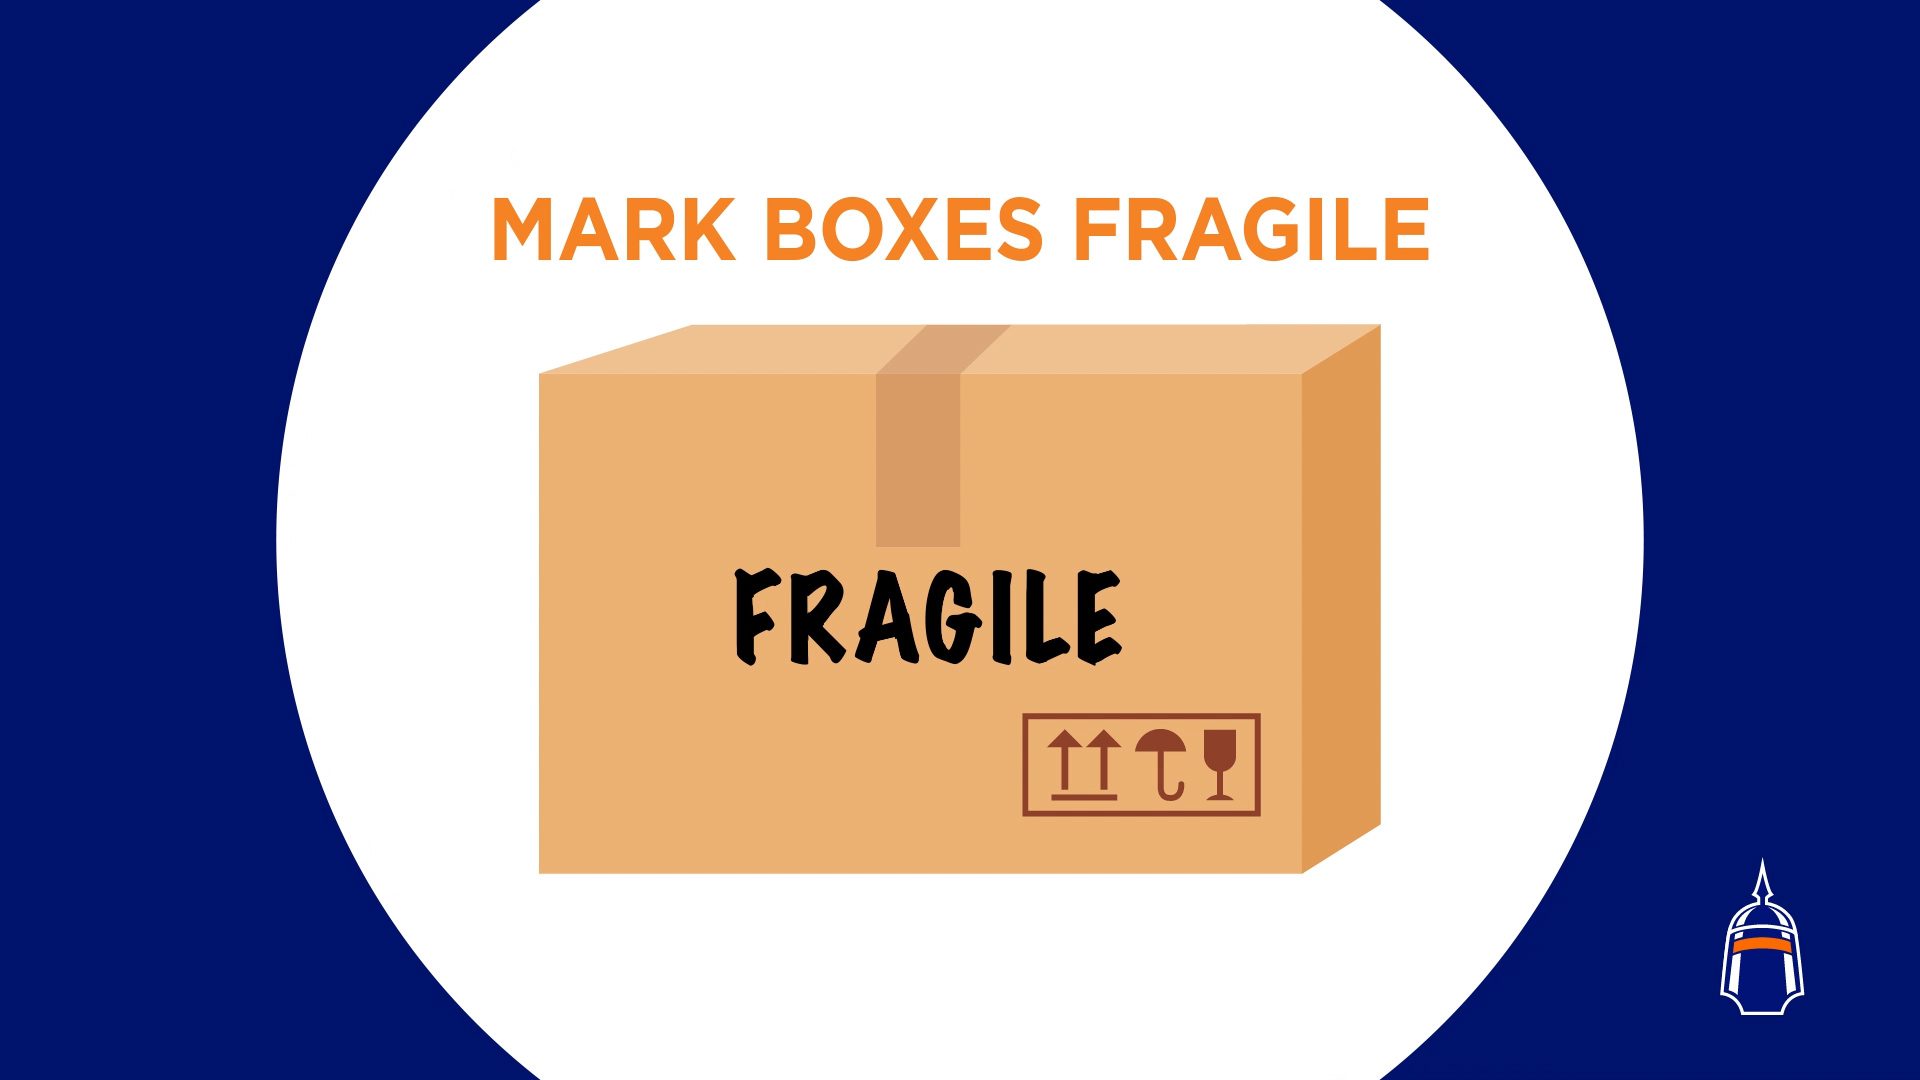 moving box containing fragile items